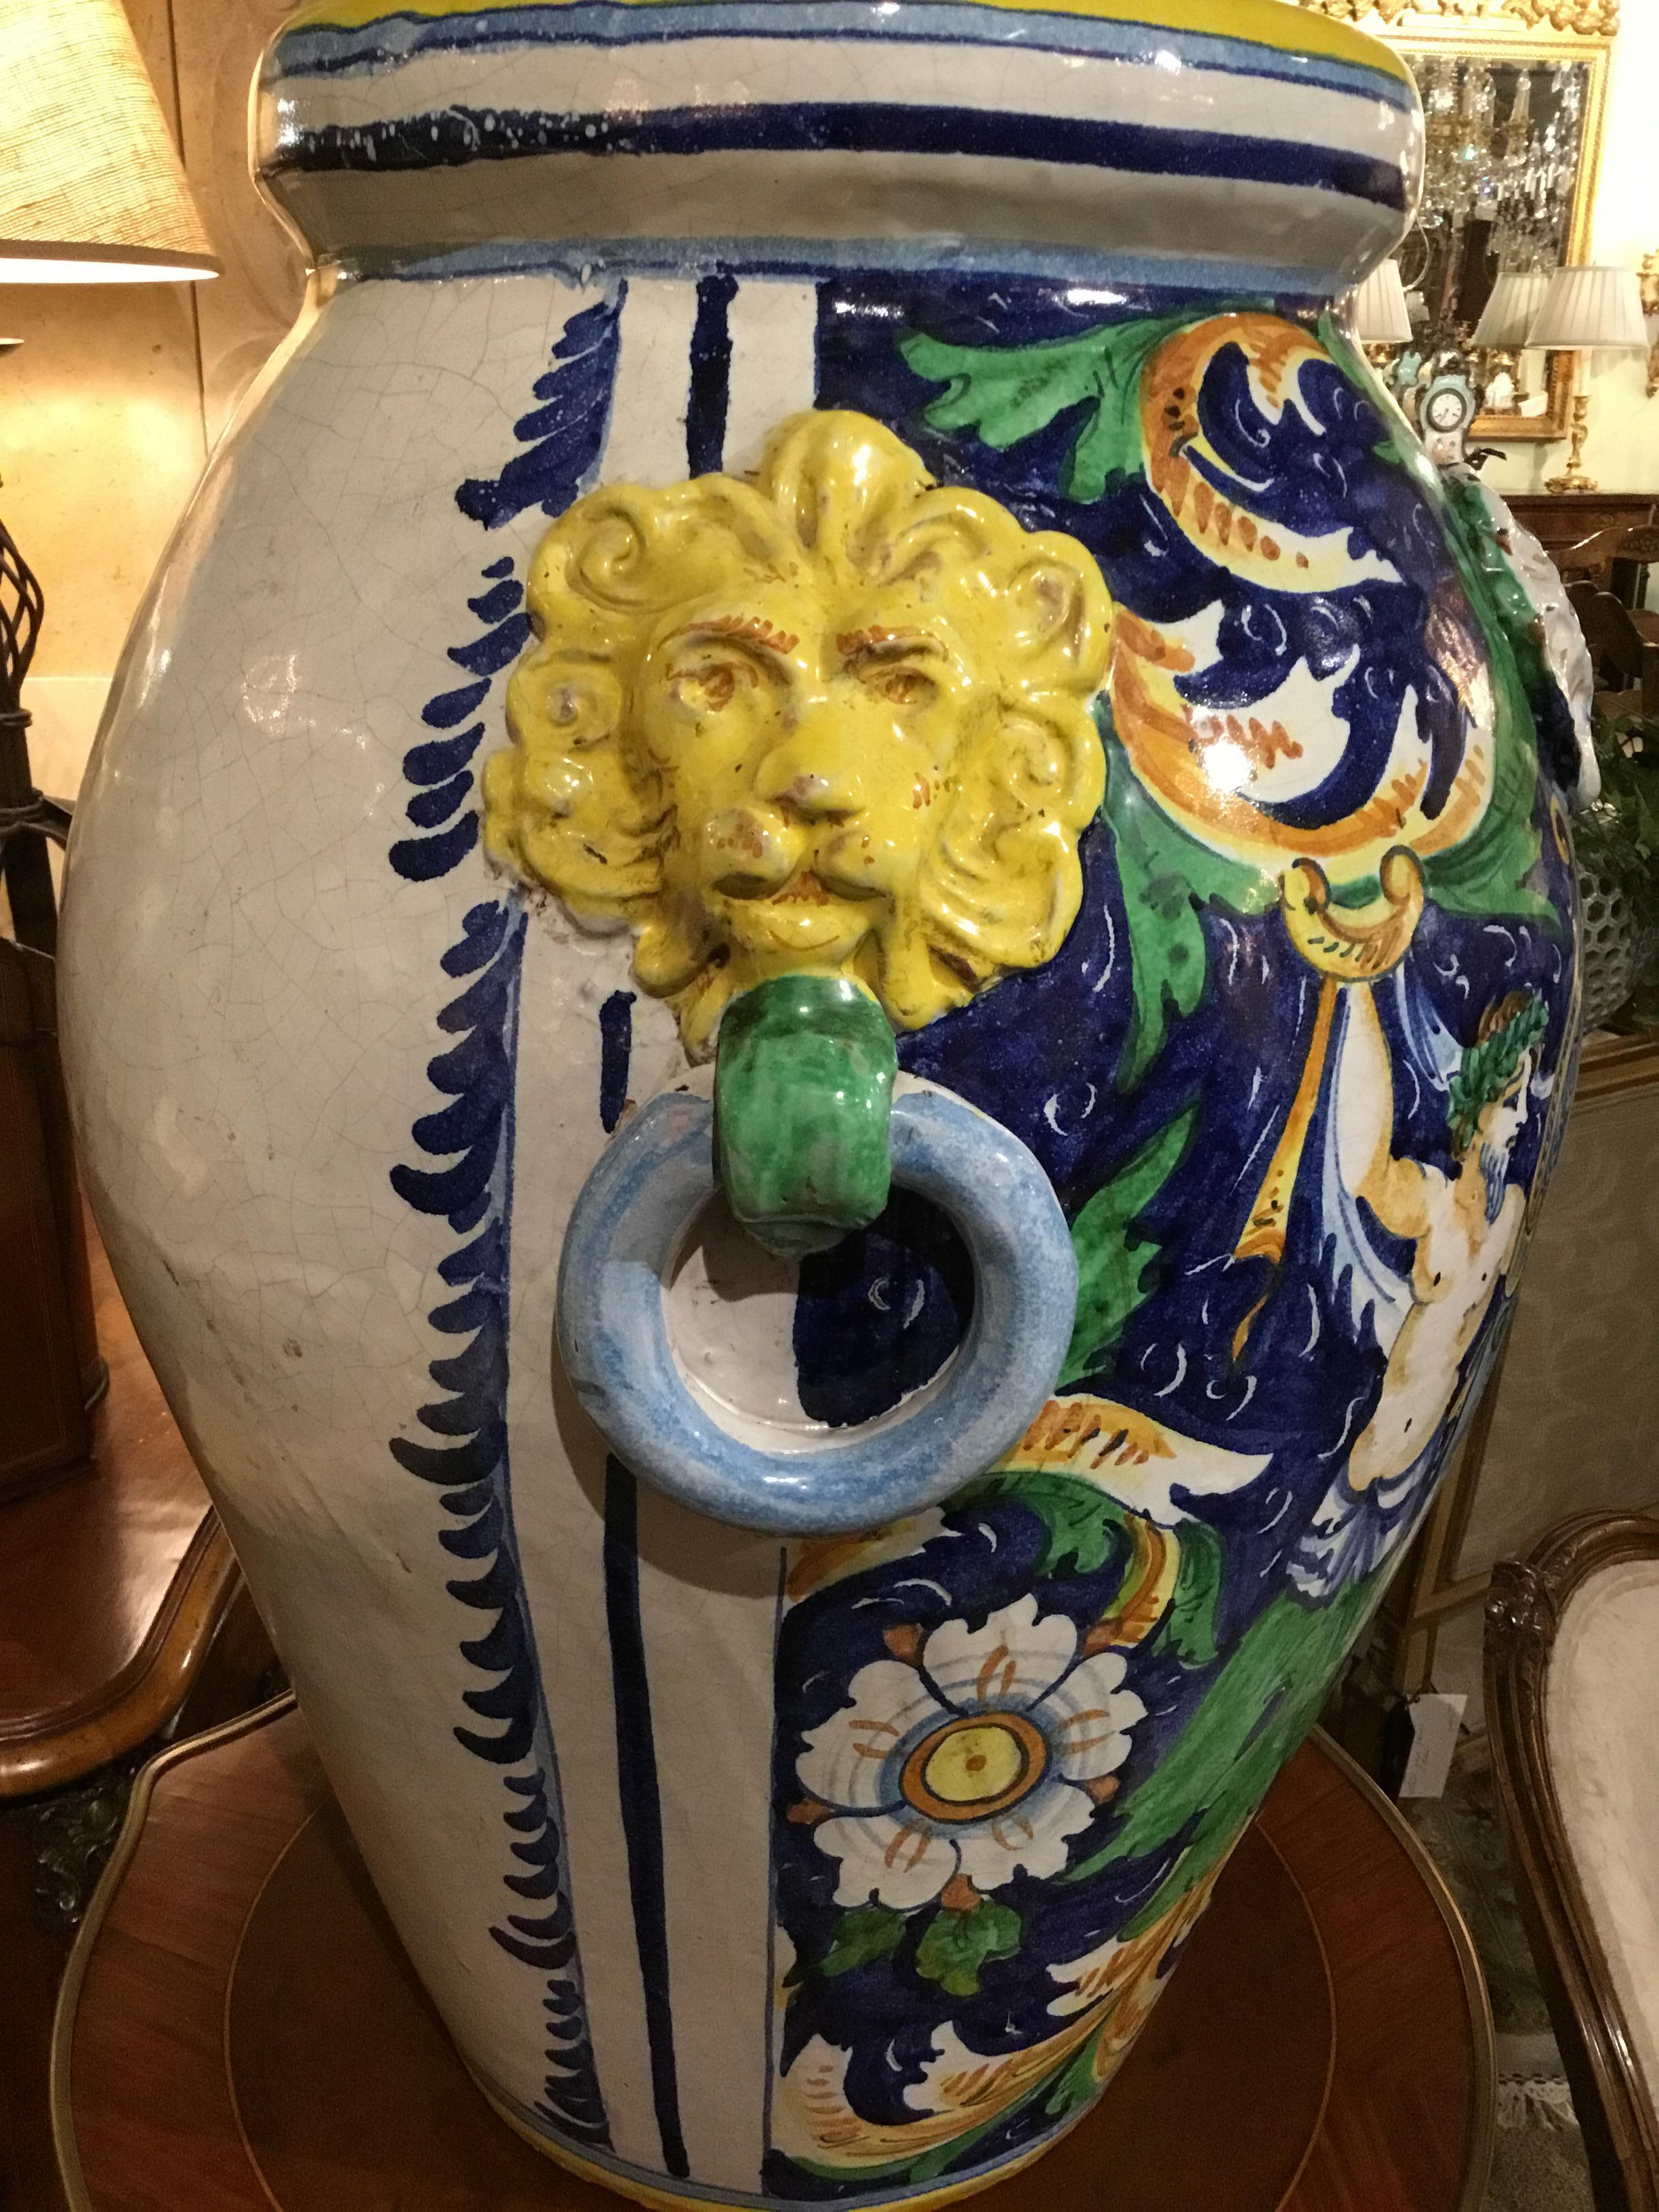 Exceptional pair of Italian vases depicting Baccantes and having
A center crest with a lion and Fleur de Lis, Lion masks with rings
Decorate the sides of these colorful pieces.
Yellow, green and blue hues in vibrant co.







  